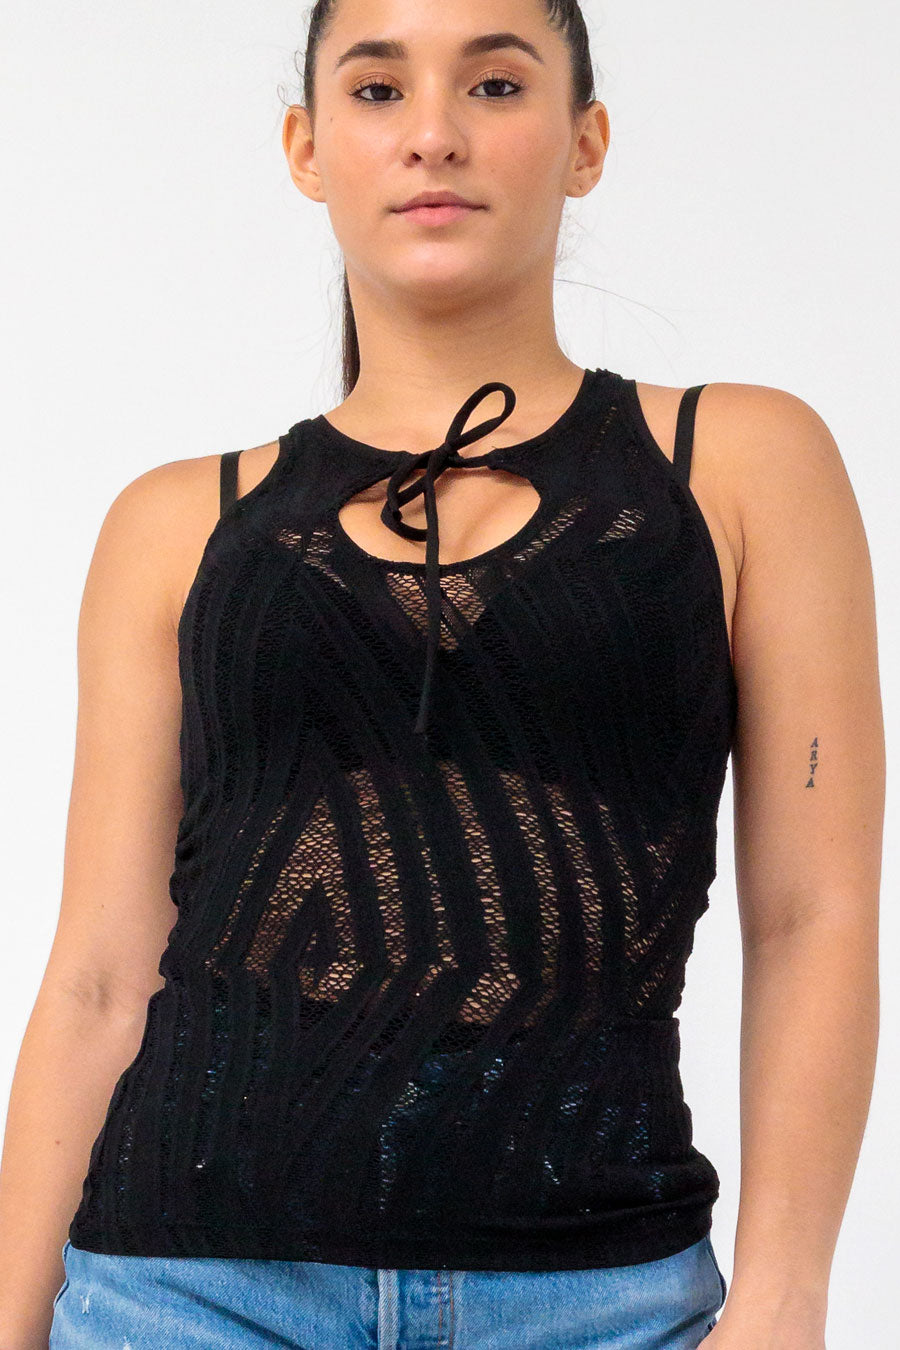 Cara Mia Lace Racer Top with Ties - Black Animal Lace -limited edition